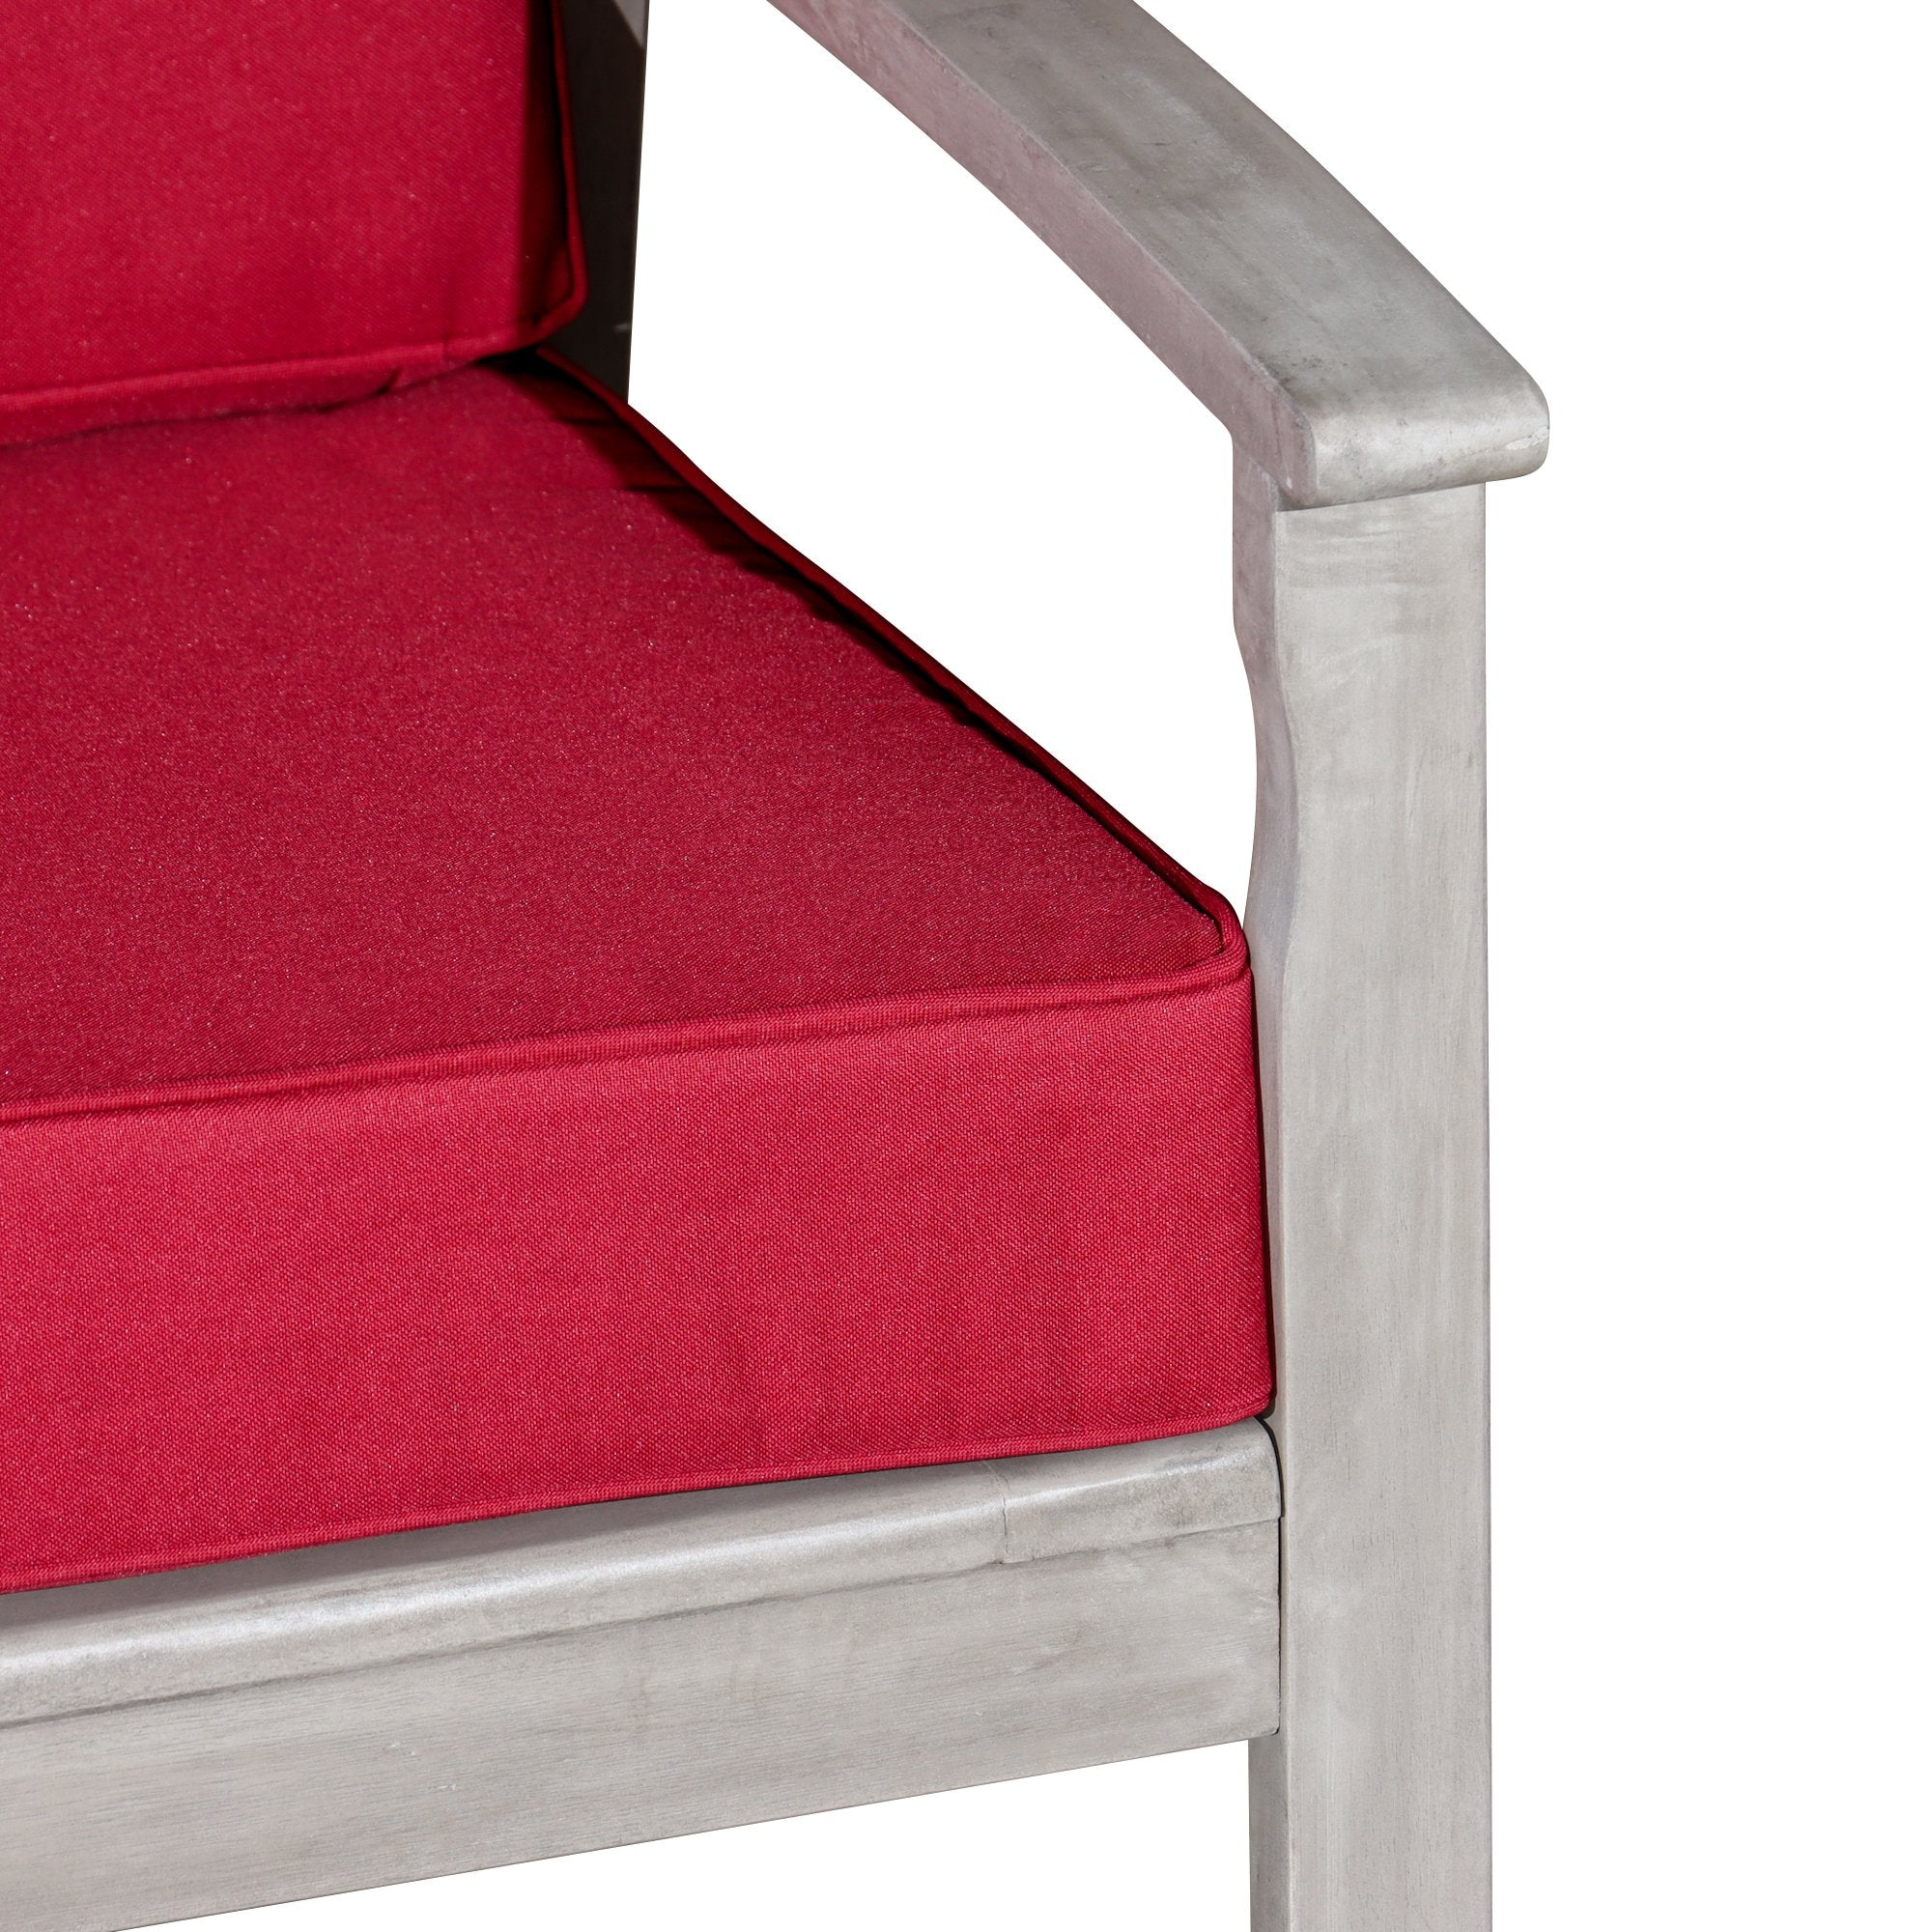 Outdoor Loveseat with Cushions, Silver Gray Finish, Burgundy Cushions - Tuesday Morning-Chairs & Seating